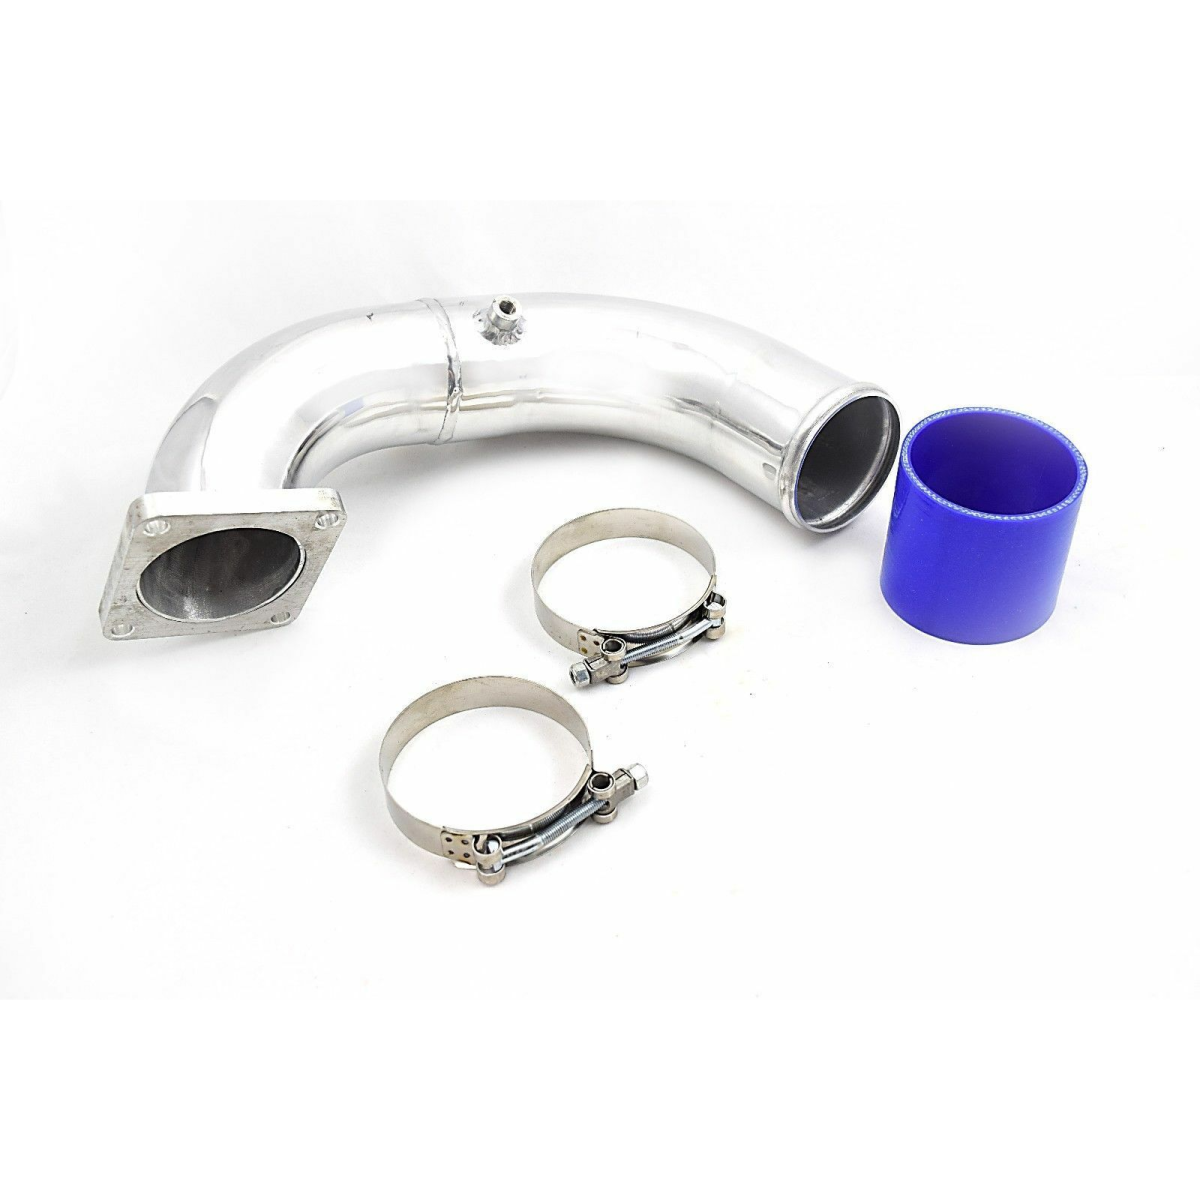 Rudy's Performance Parts - Rudy's Intake Manifold Elbow Pipe For 94-98 Dodge 5.9L 12V Cummins Diesel